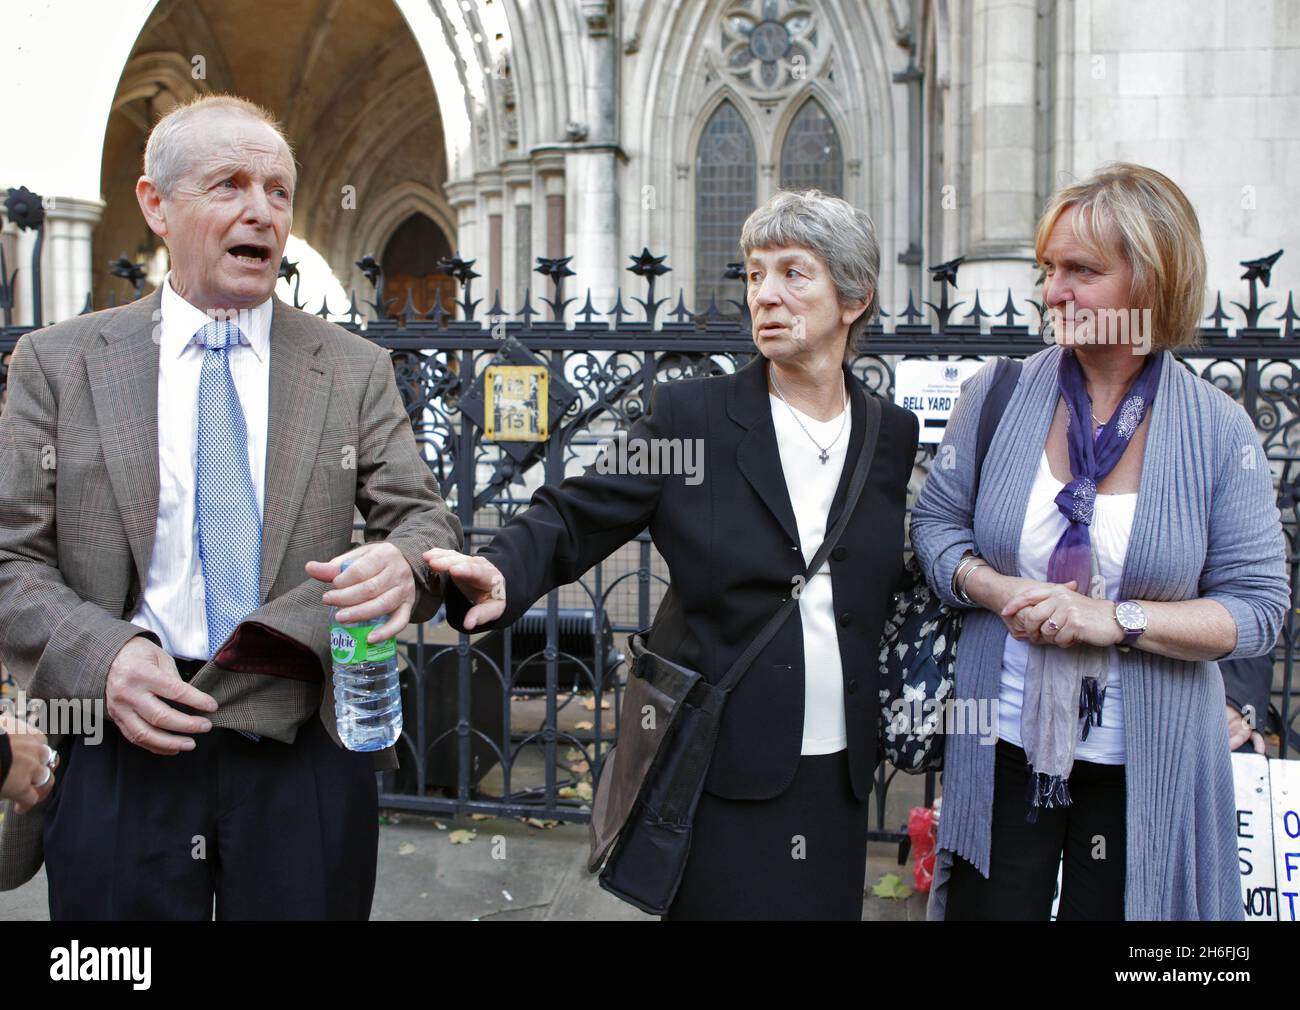 The inquests into the 7/7 bombings has begun at the High Court in London today. Hugo Keith QC, counsel to the inquests, began the hearing by reading out the names of the 52 innocent victims of the 2005 attacks. Picture shows: Family members of the victims arriving at the court. L-R Sean Cassidy whose son Kieran died at Kings Cross, Hazel Webb whose daughter died at Edgeware Road and Julie Nicolson whose daughter Jennifer died at Edgeware Road. Stock Photo